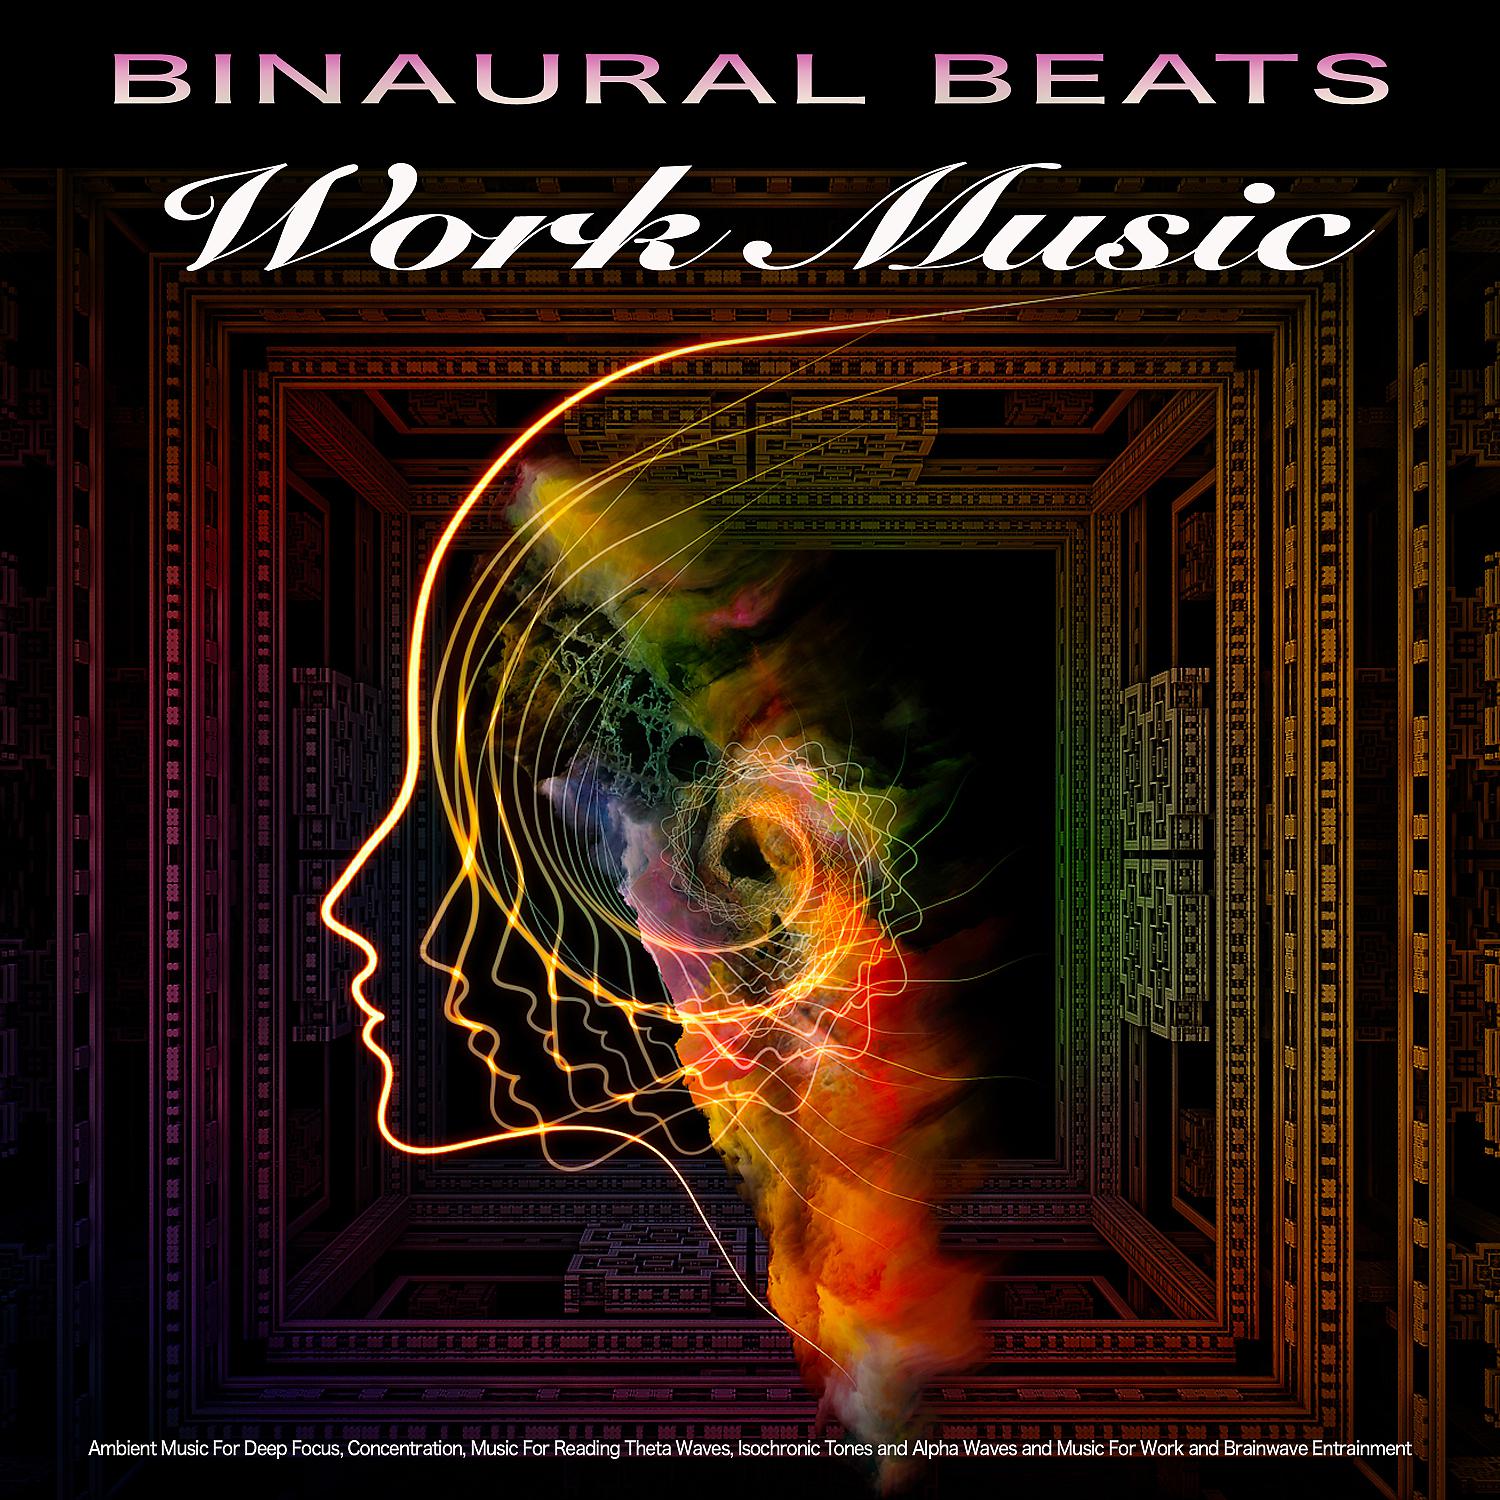 Постер альбома Binaural Beats Work Music: Ambient Music For Deep Focus, Concentration, Music For Reading Theta Waves, Isochronic Tones and Alpha Waves and Music For Work and Brainwave Entrainment